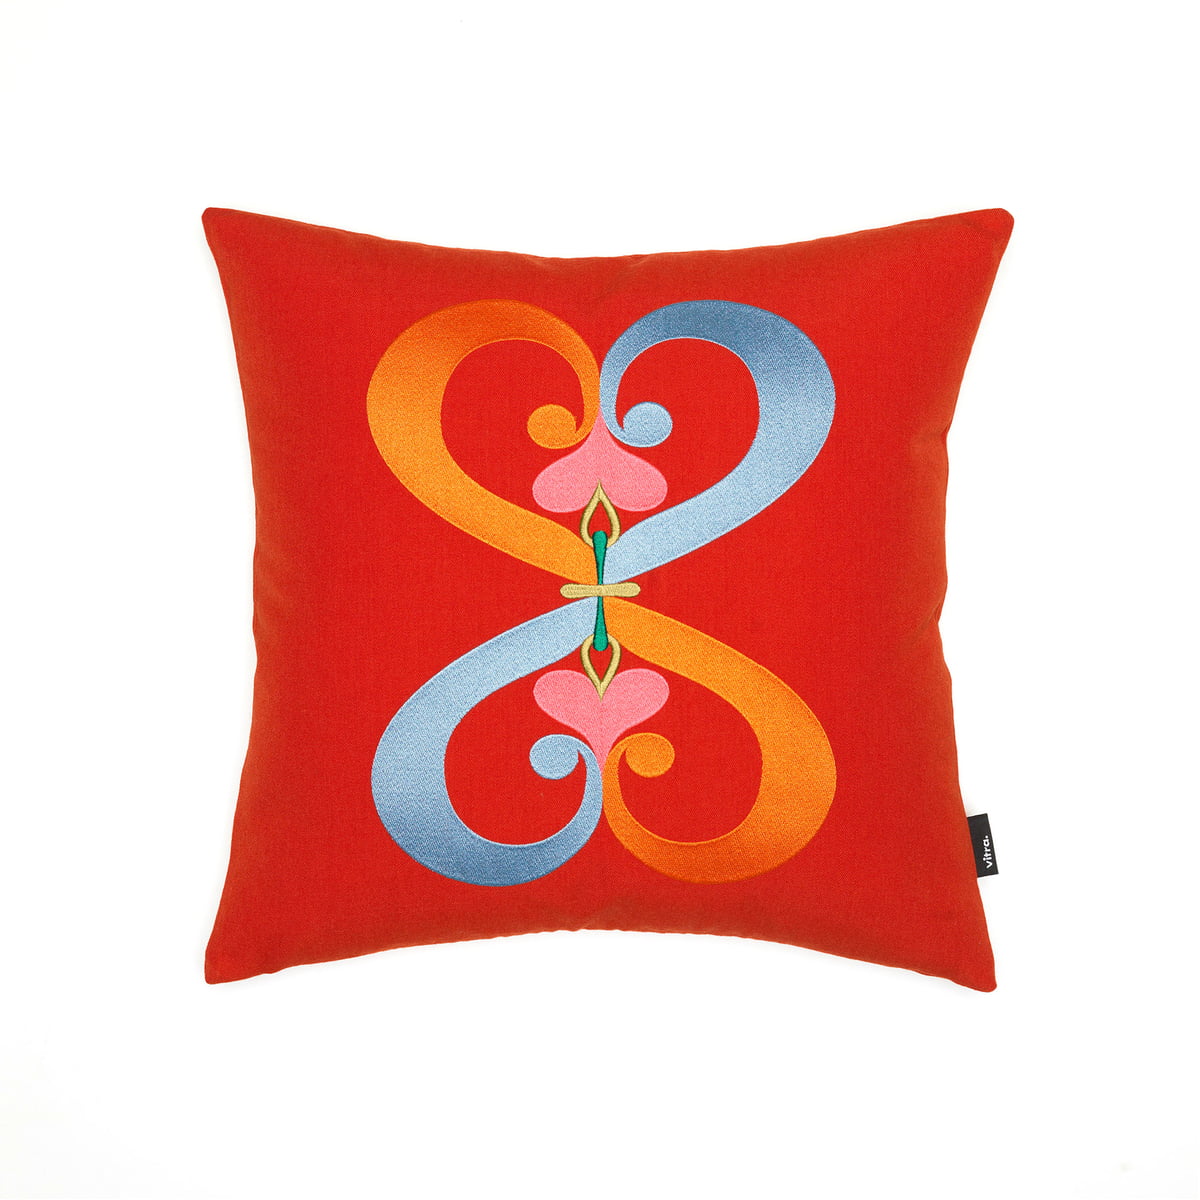 Vitra - Embroidered Kissen Double Heart